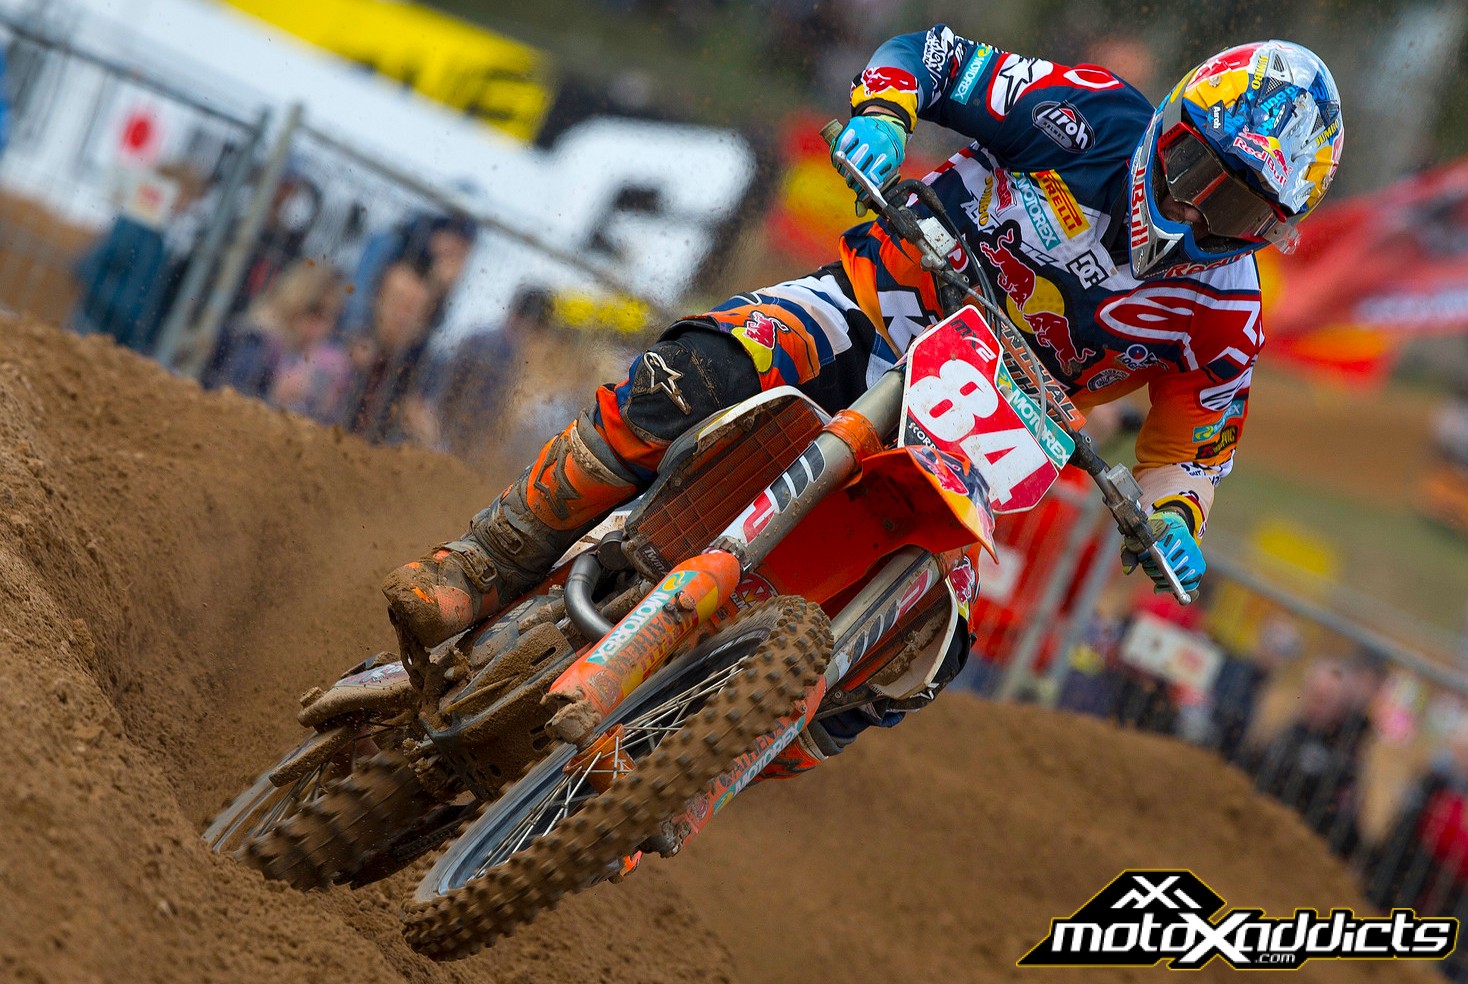 Will Jeffrey dominate in MXGP like he is in MX2? Only time will tell.